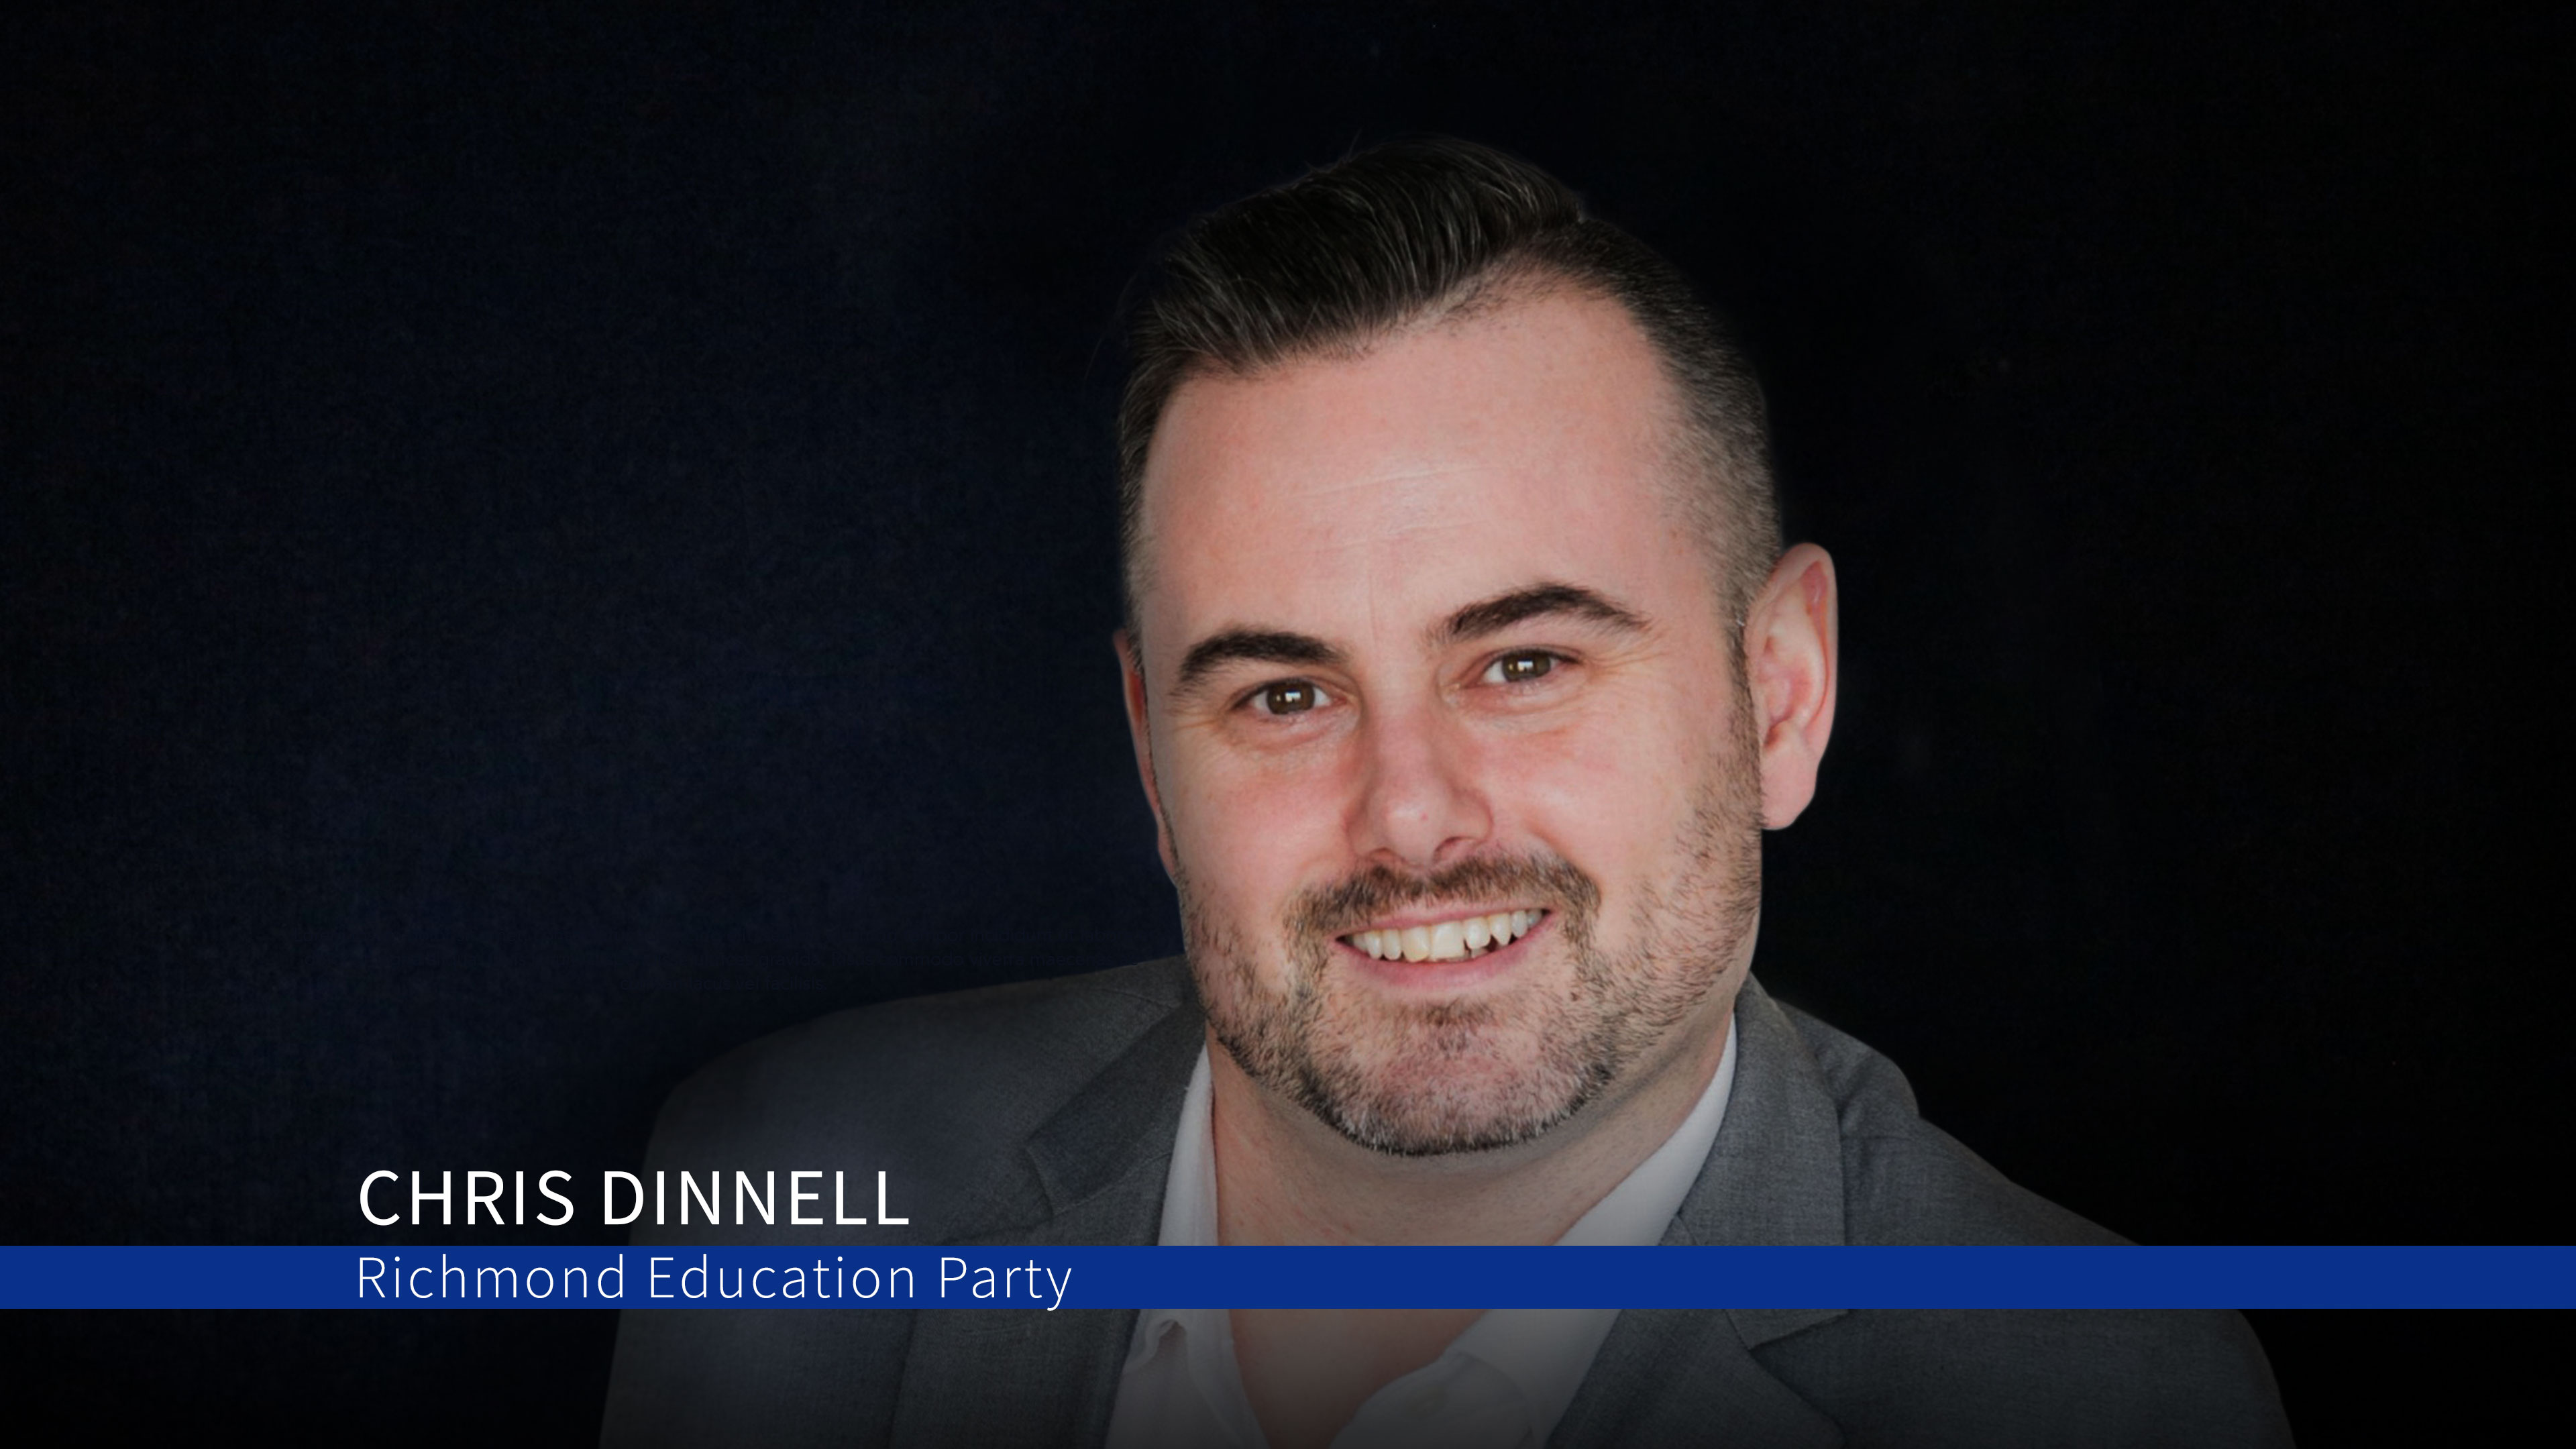 2022 City of Richmond Election for School Trustee - Chris Dinnell